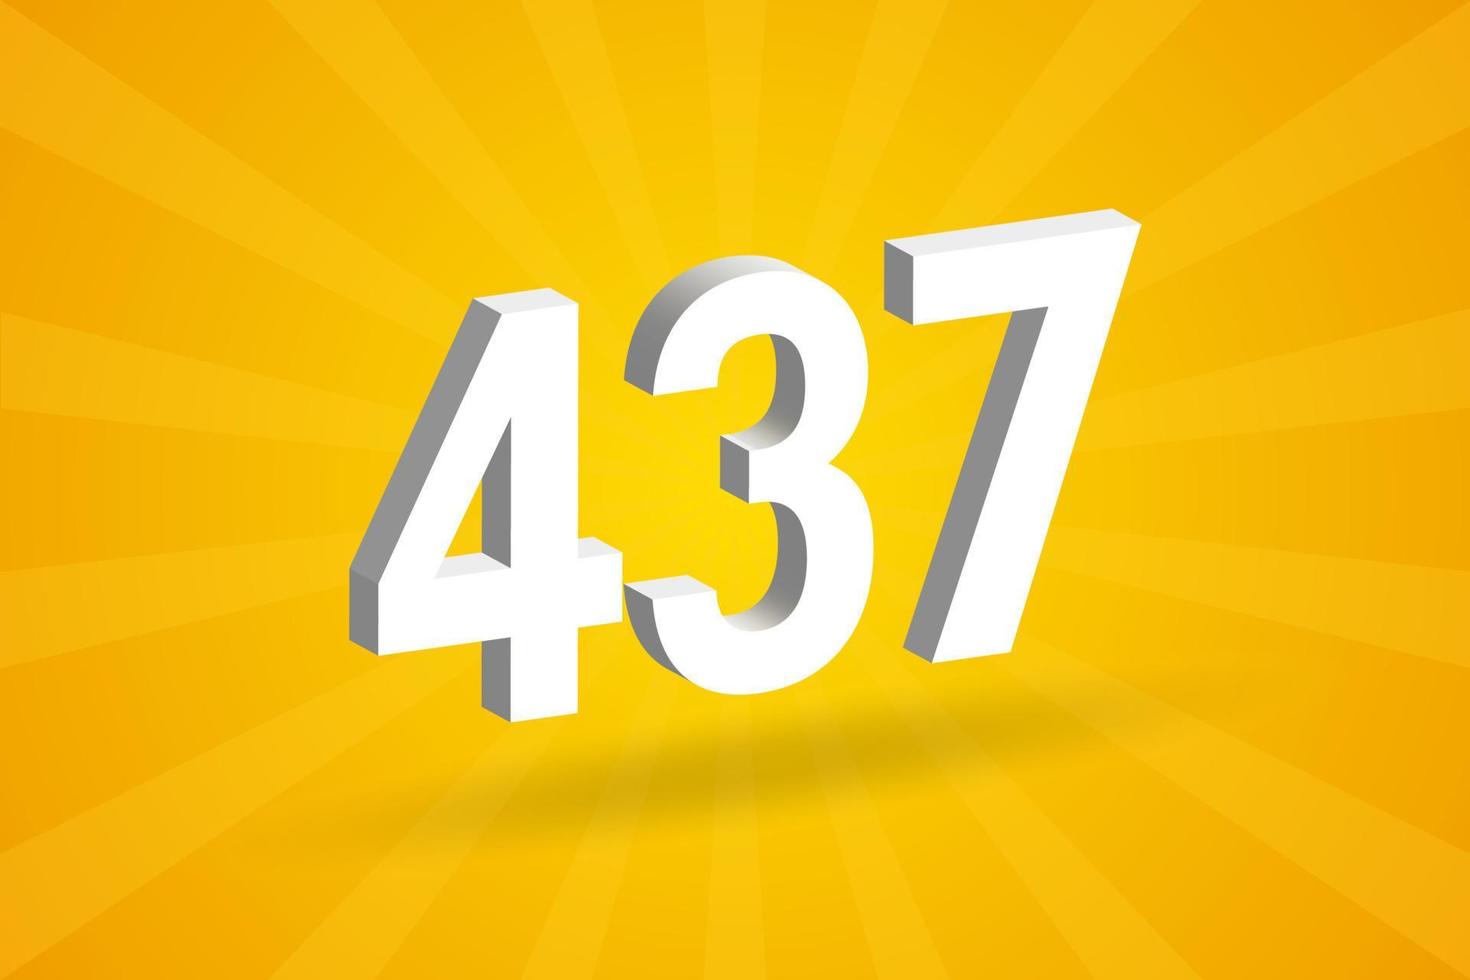 3D 437 number font alphabet. White 3D Number 437 with yellow background vector